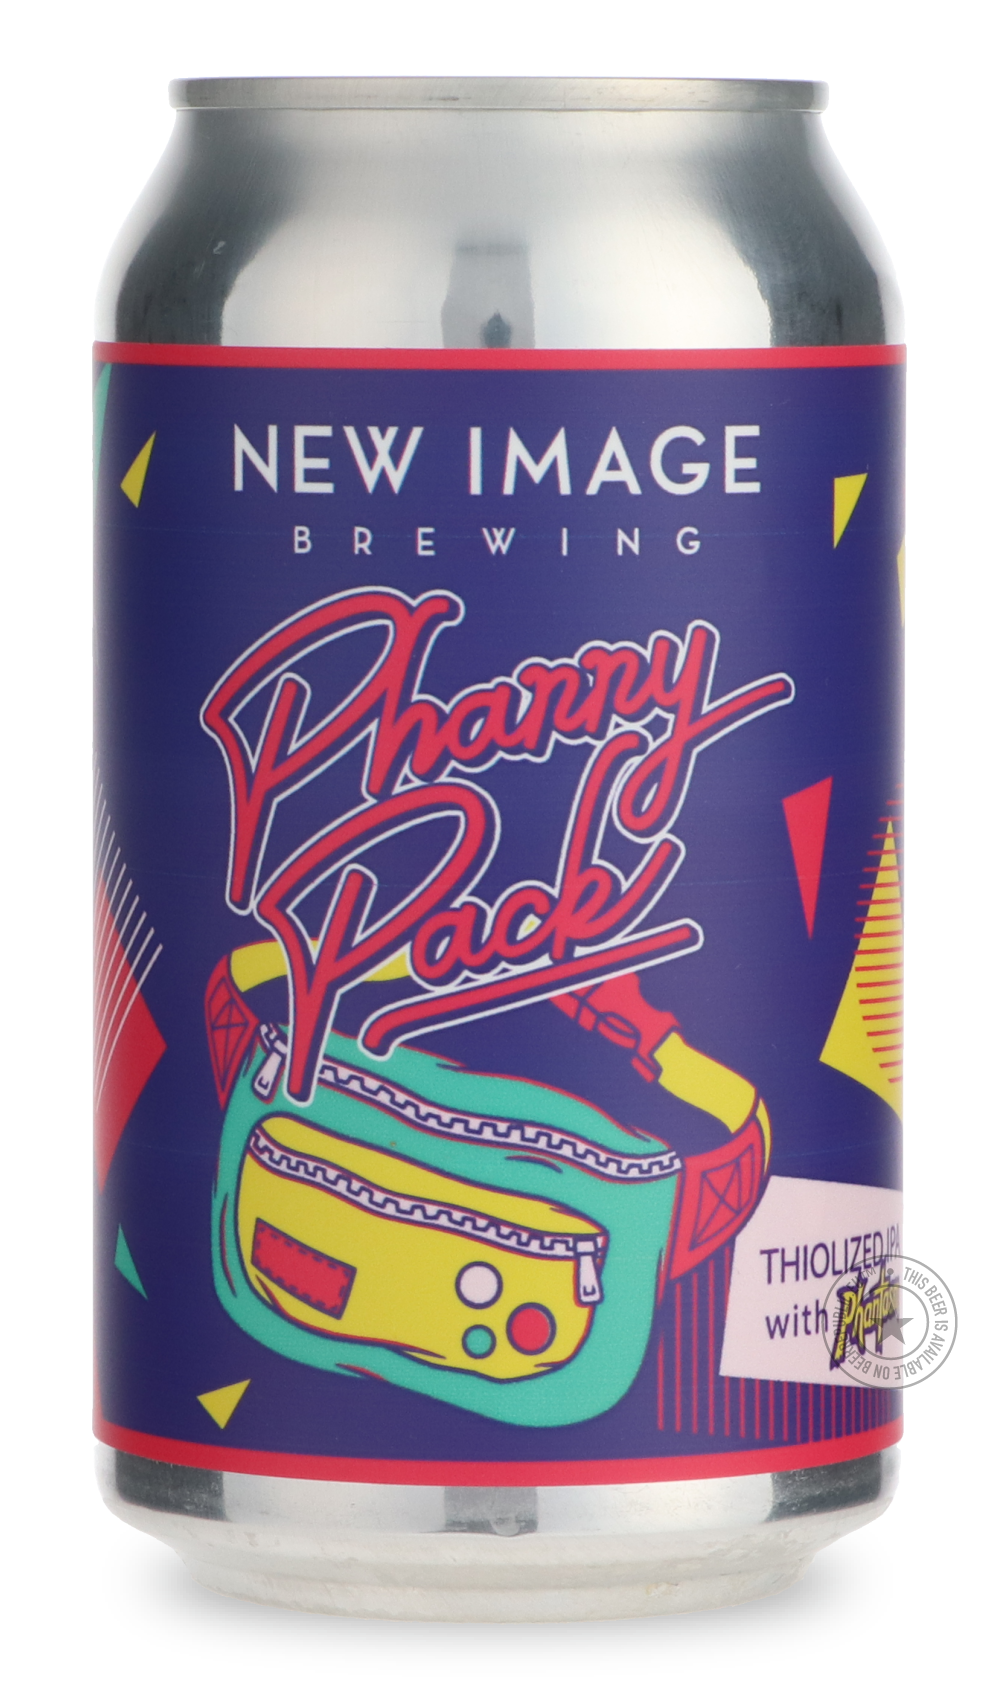 -New Image- Phanny Pack-IPA- Only @ Beer Republic - The best online beer store for American & Canadian craft beer - Buy beer online from the USA and Canada - Bier online kopen - Amerikaans bier kopen - Craft beer store - Craft beer kopen - Amerikanisch bier kaufen - Bier online kaufen - Acheter biere online - IPA - Stout - Porter - New England IPA - Hazy IPA - Imperial Stout - Barrel Aged - Barrel Aged Imperial Stout - Brown - Dark beer - Blond - Blonde - Pilsner - Lager - Wheat - Weizen - Amber - Barley Wi